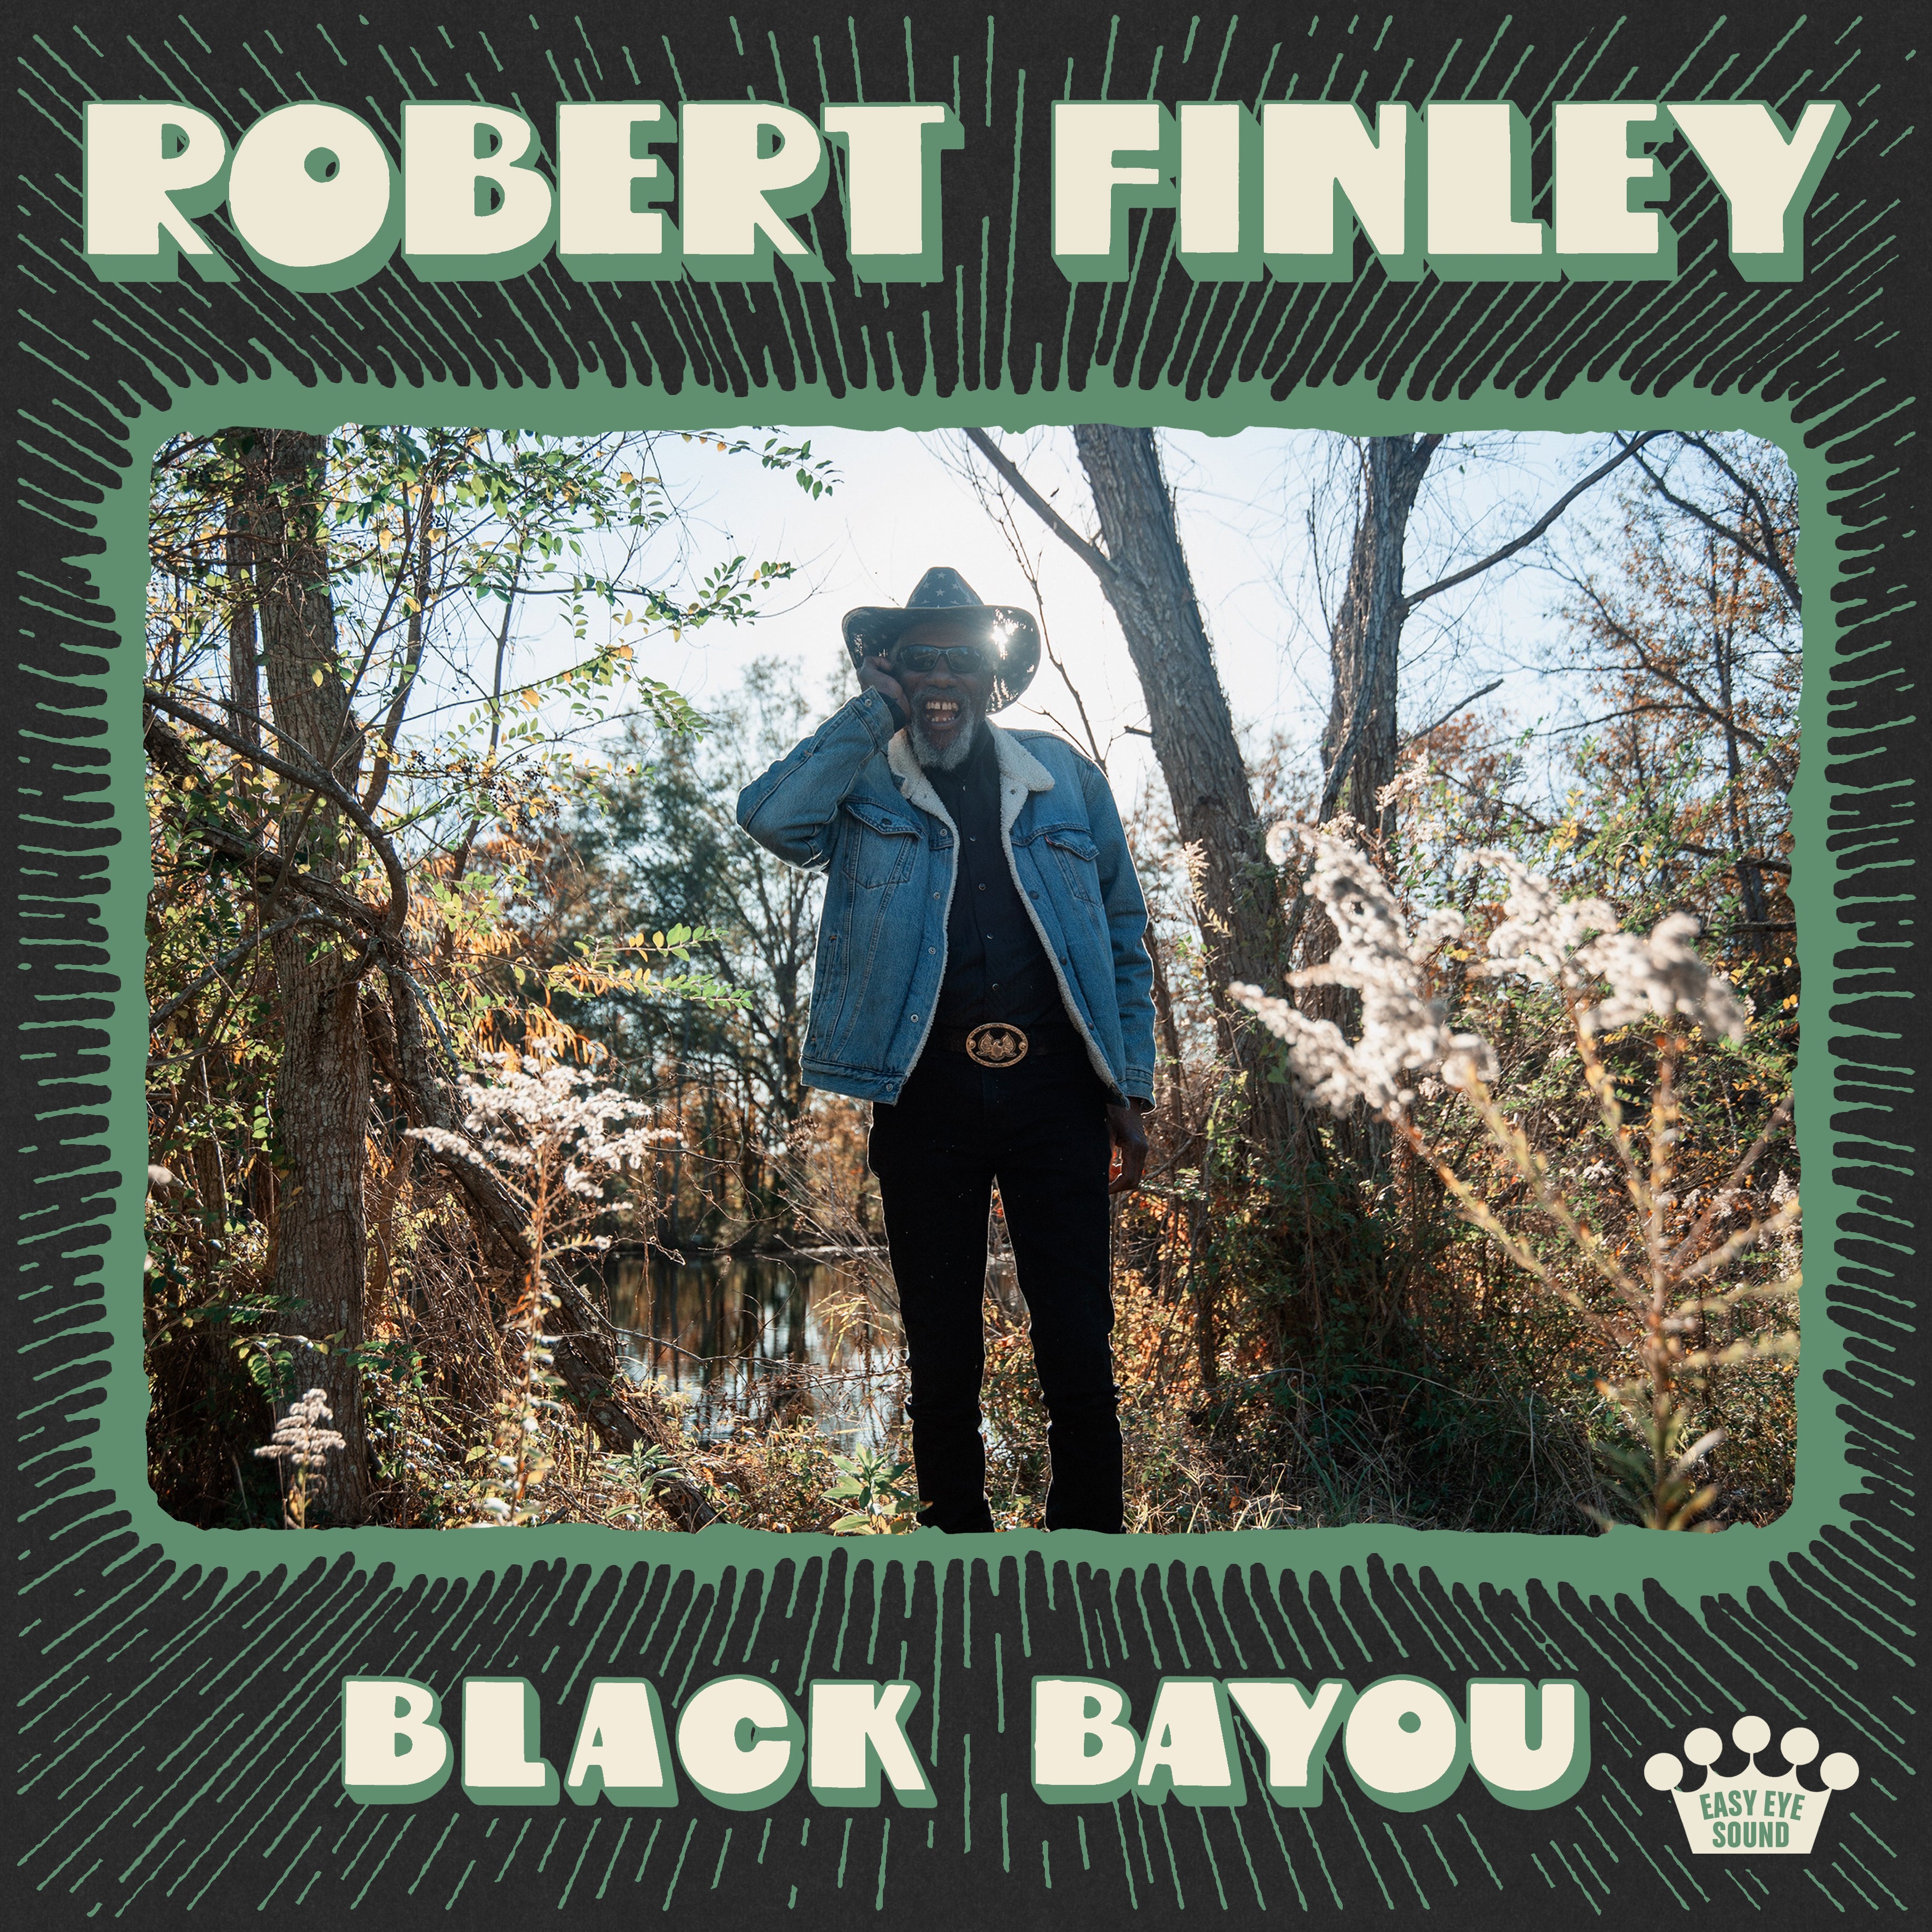 Robert Finley's new album 'Black Bayou' is available now!